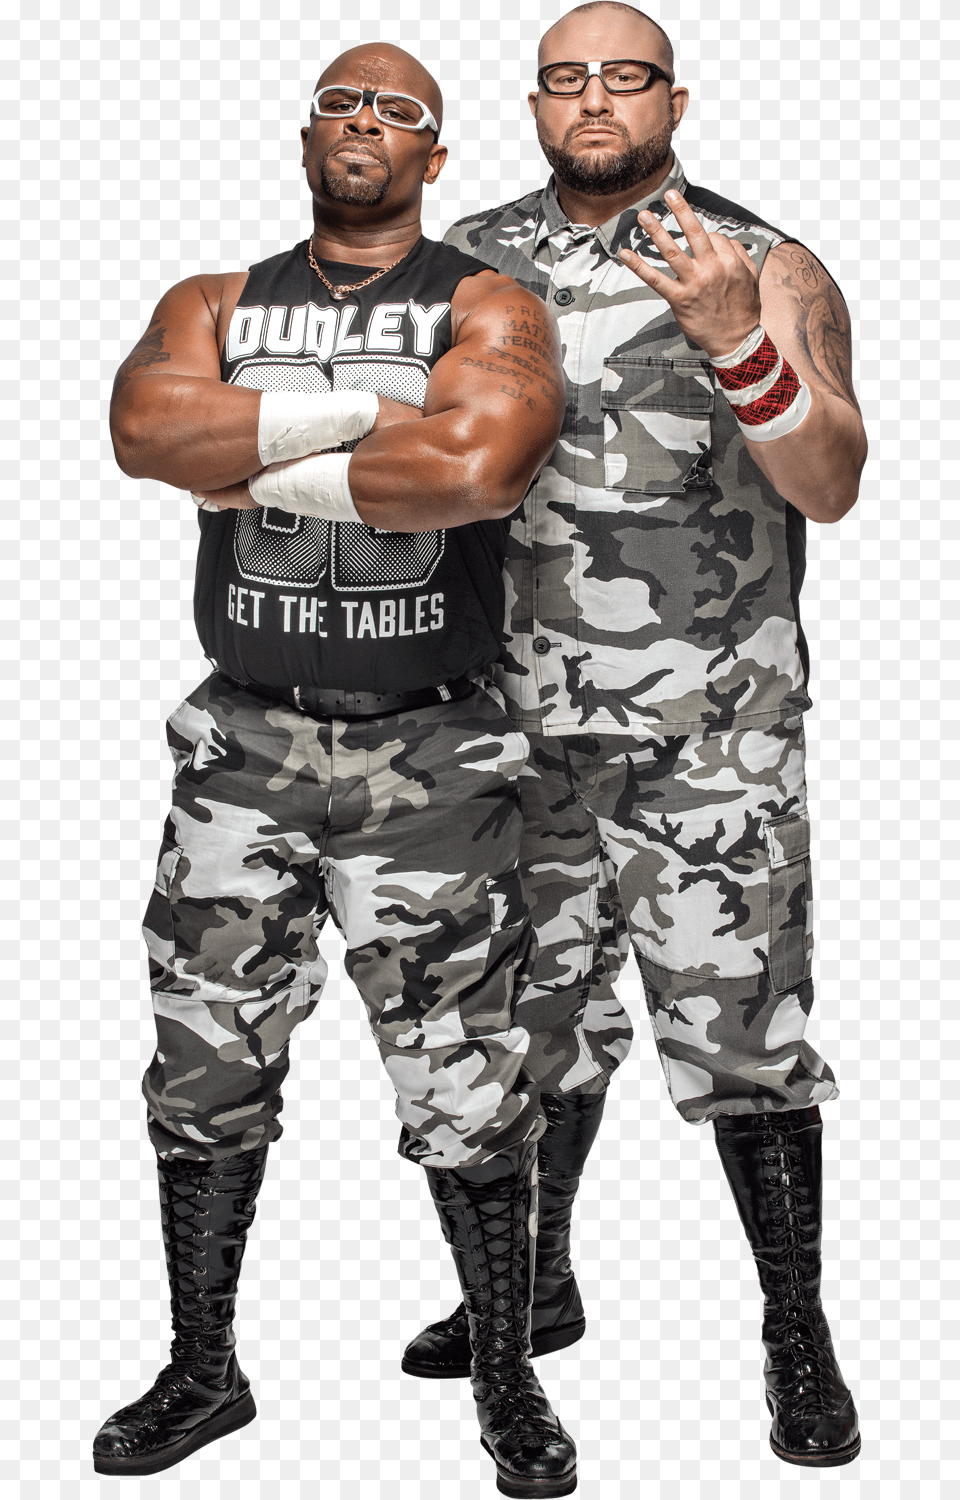 C Wwe All Things Legends Dudley Boyz, Male, Adult, Person, Military Uniform Png Image